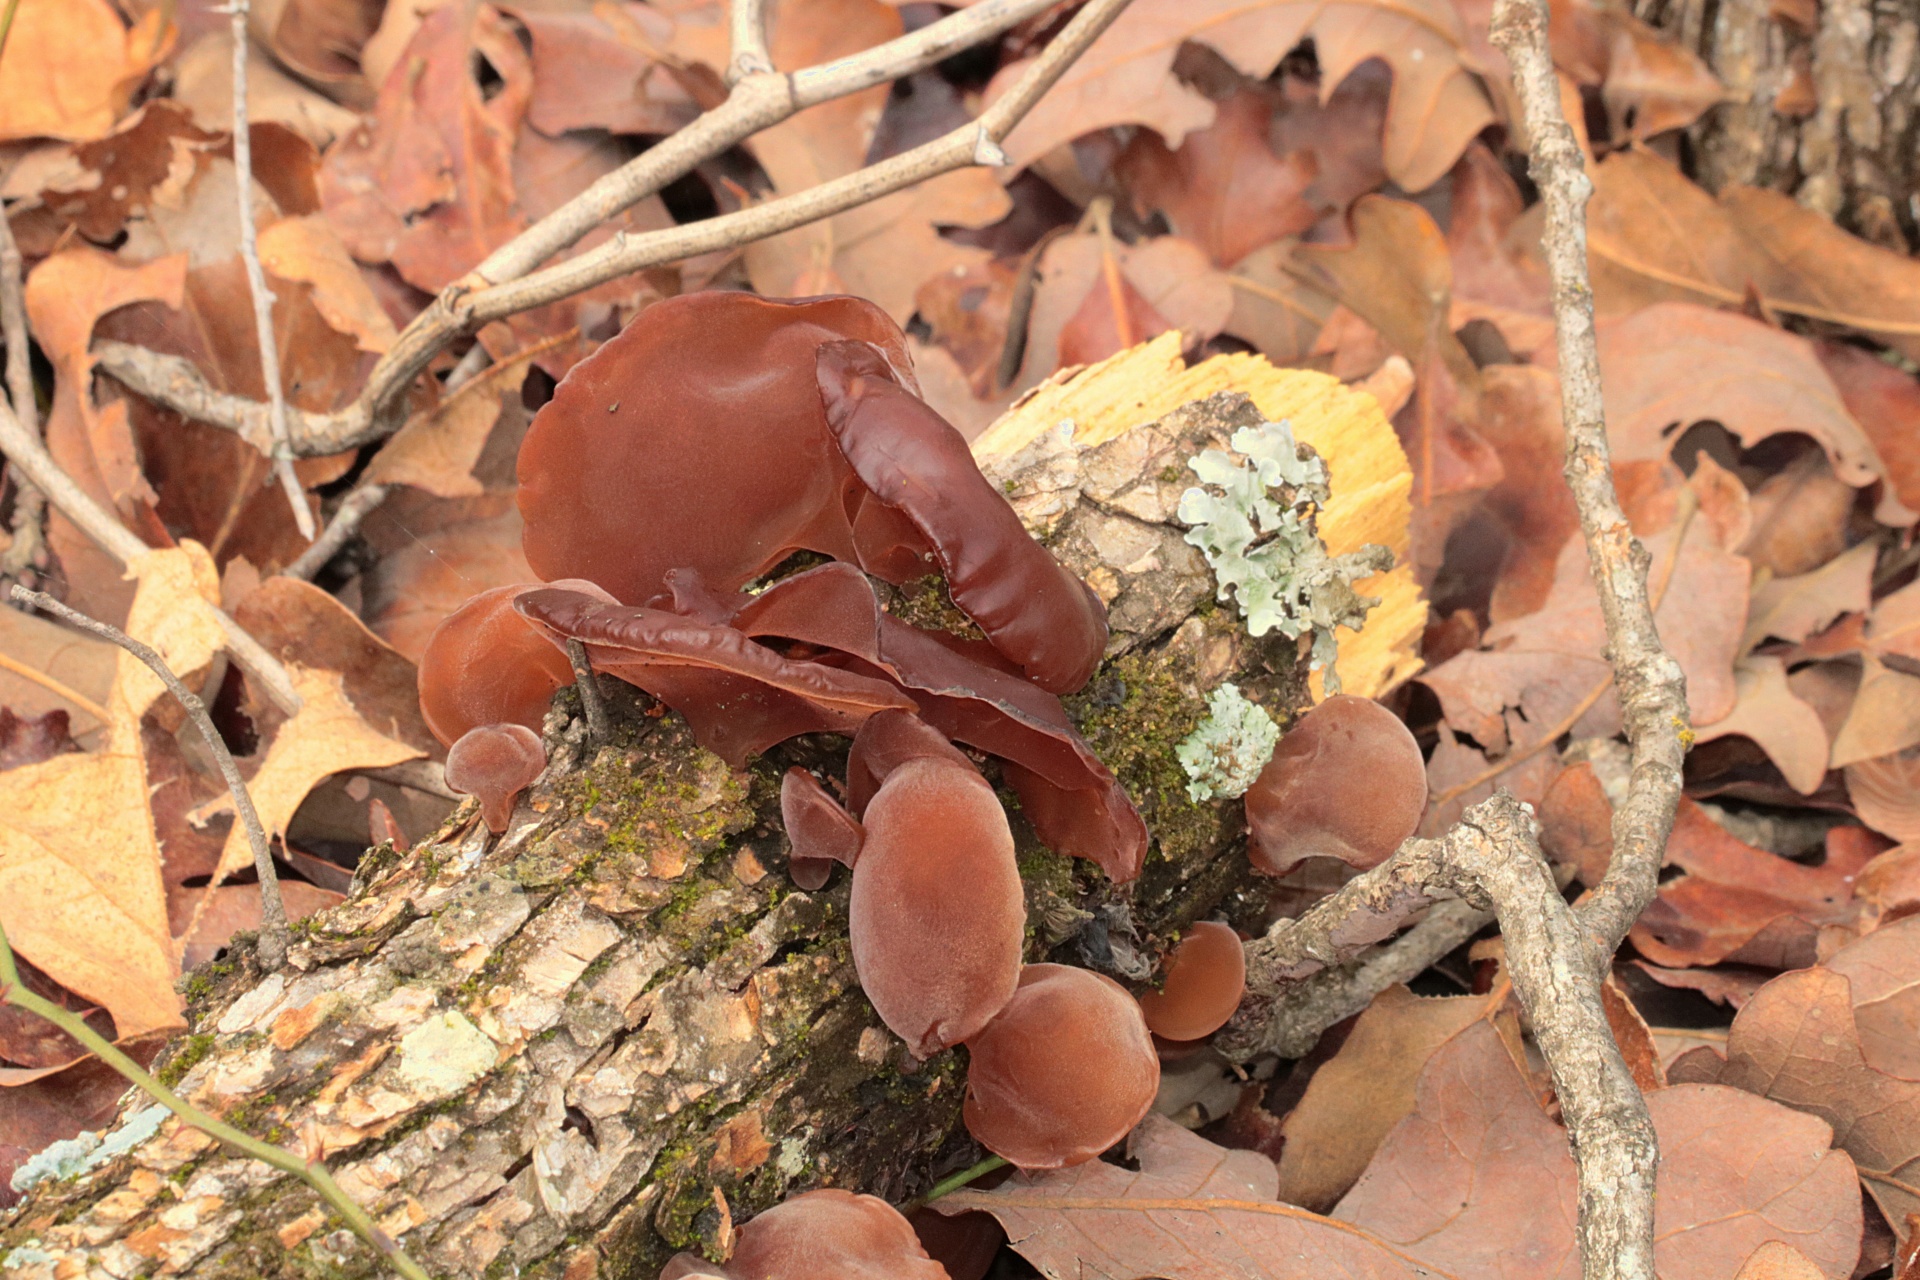 A group of brown wood ear fungus growing on a fallen tree branch that is lying among brown leaves on the floor of the woods.